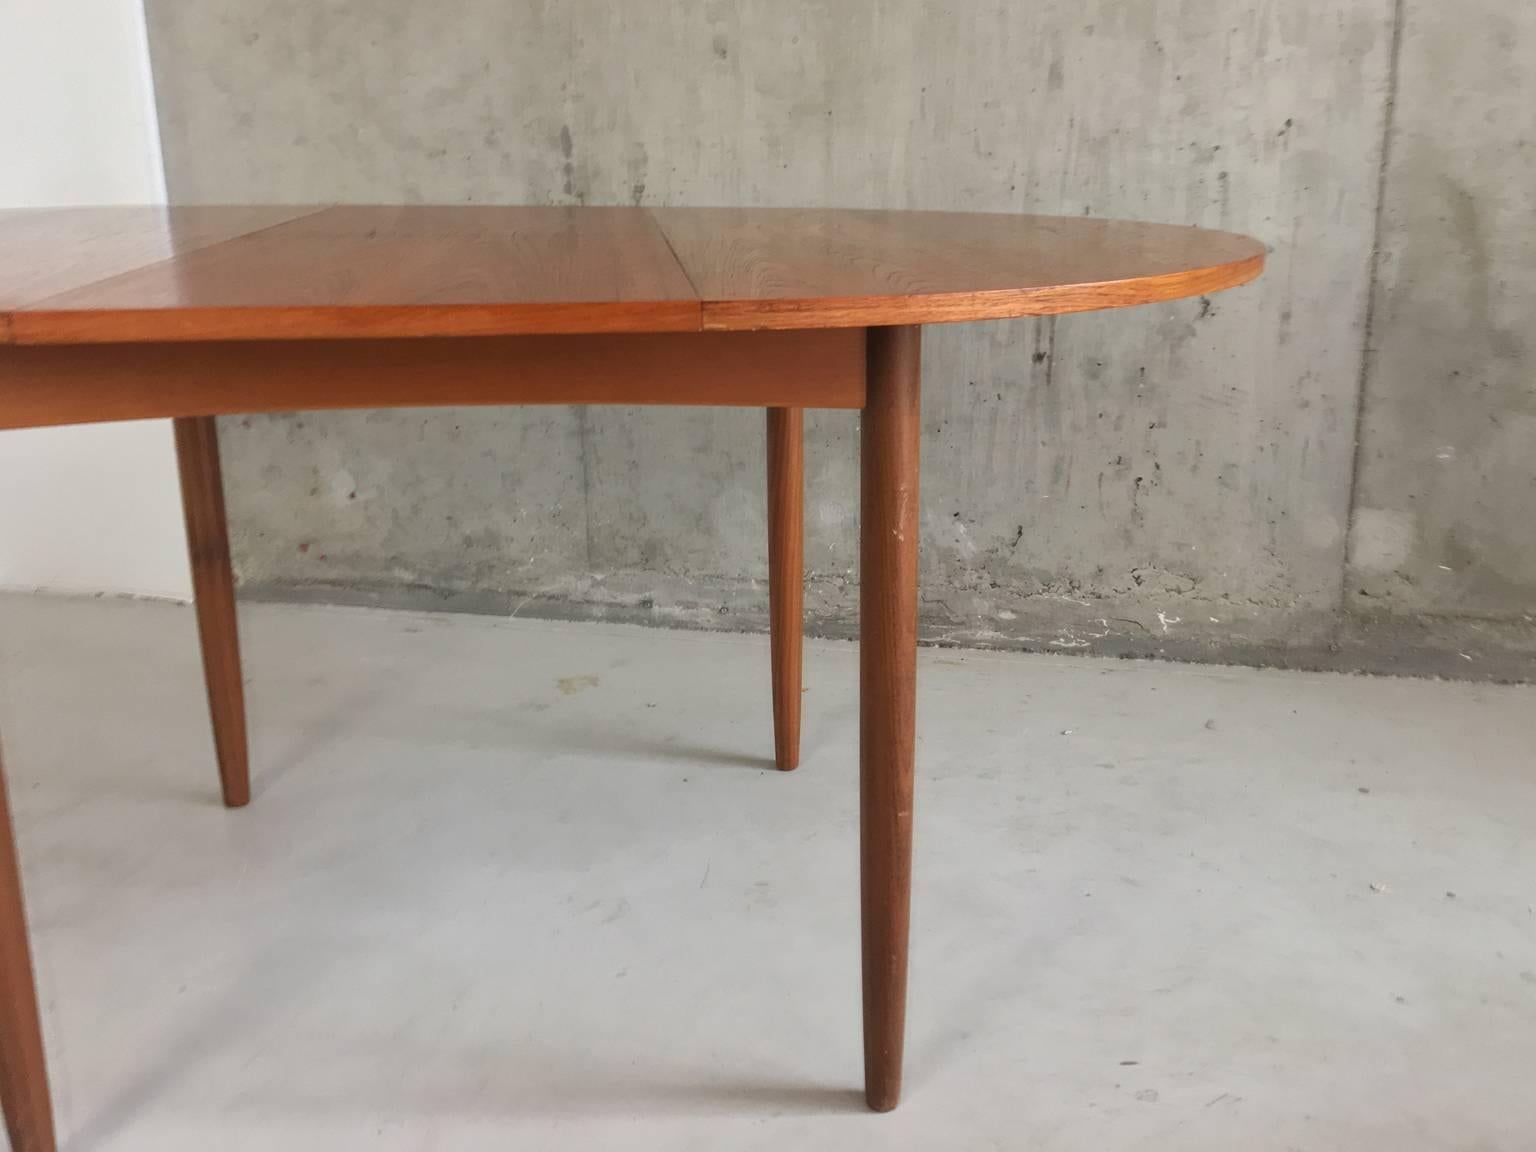 A solid teak original extendable G plan table with lovely wood grain. The table is very well made and substantial with a fold down central section. Original G plan sticker on underside of flap.